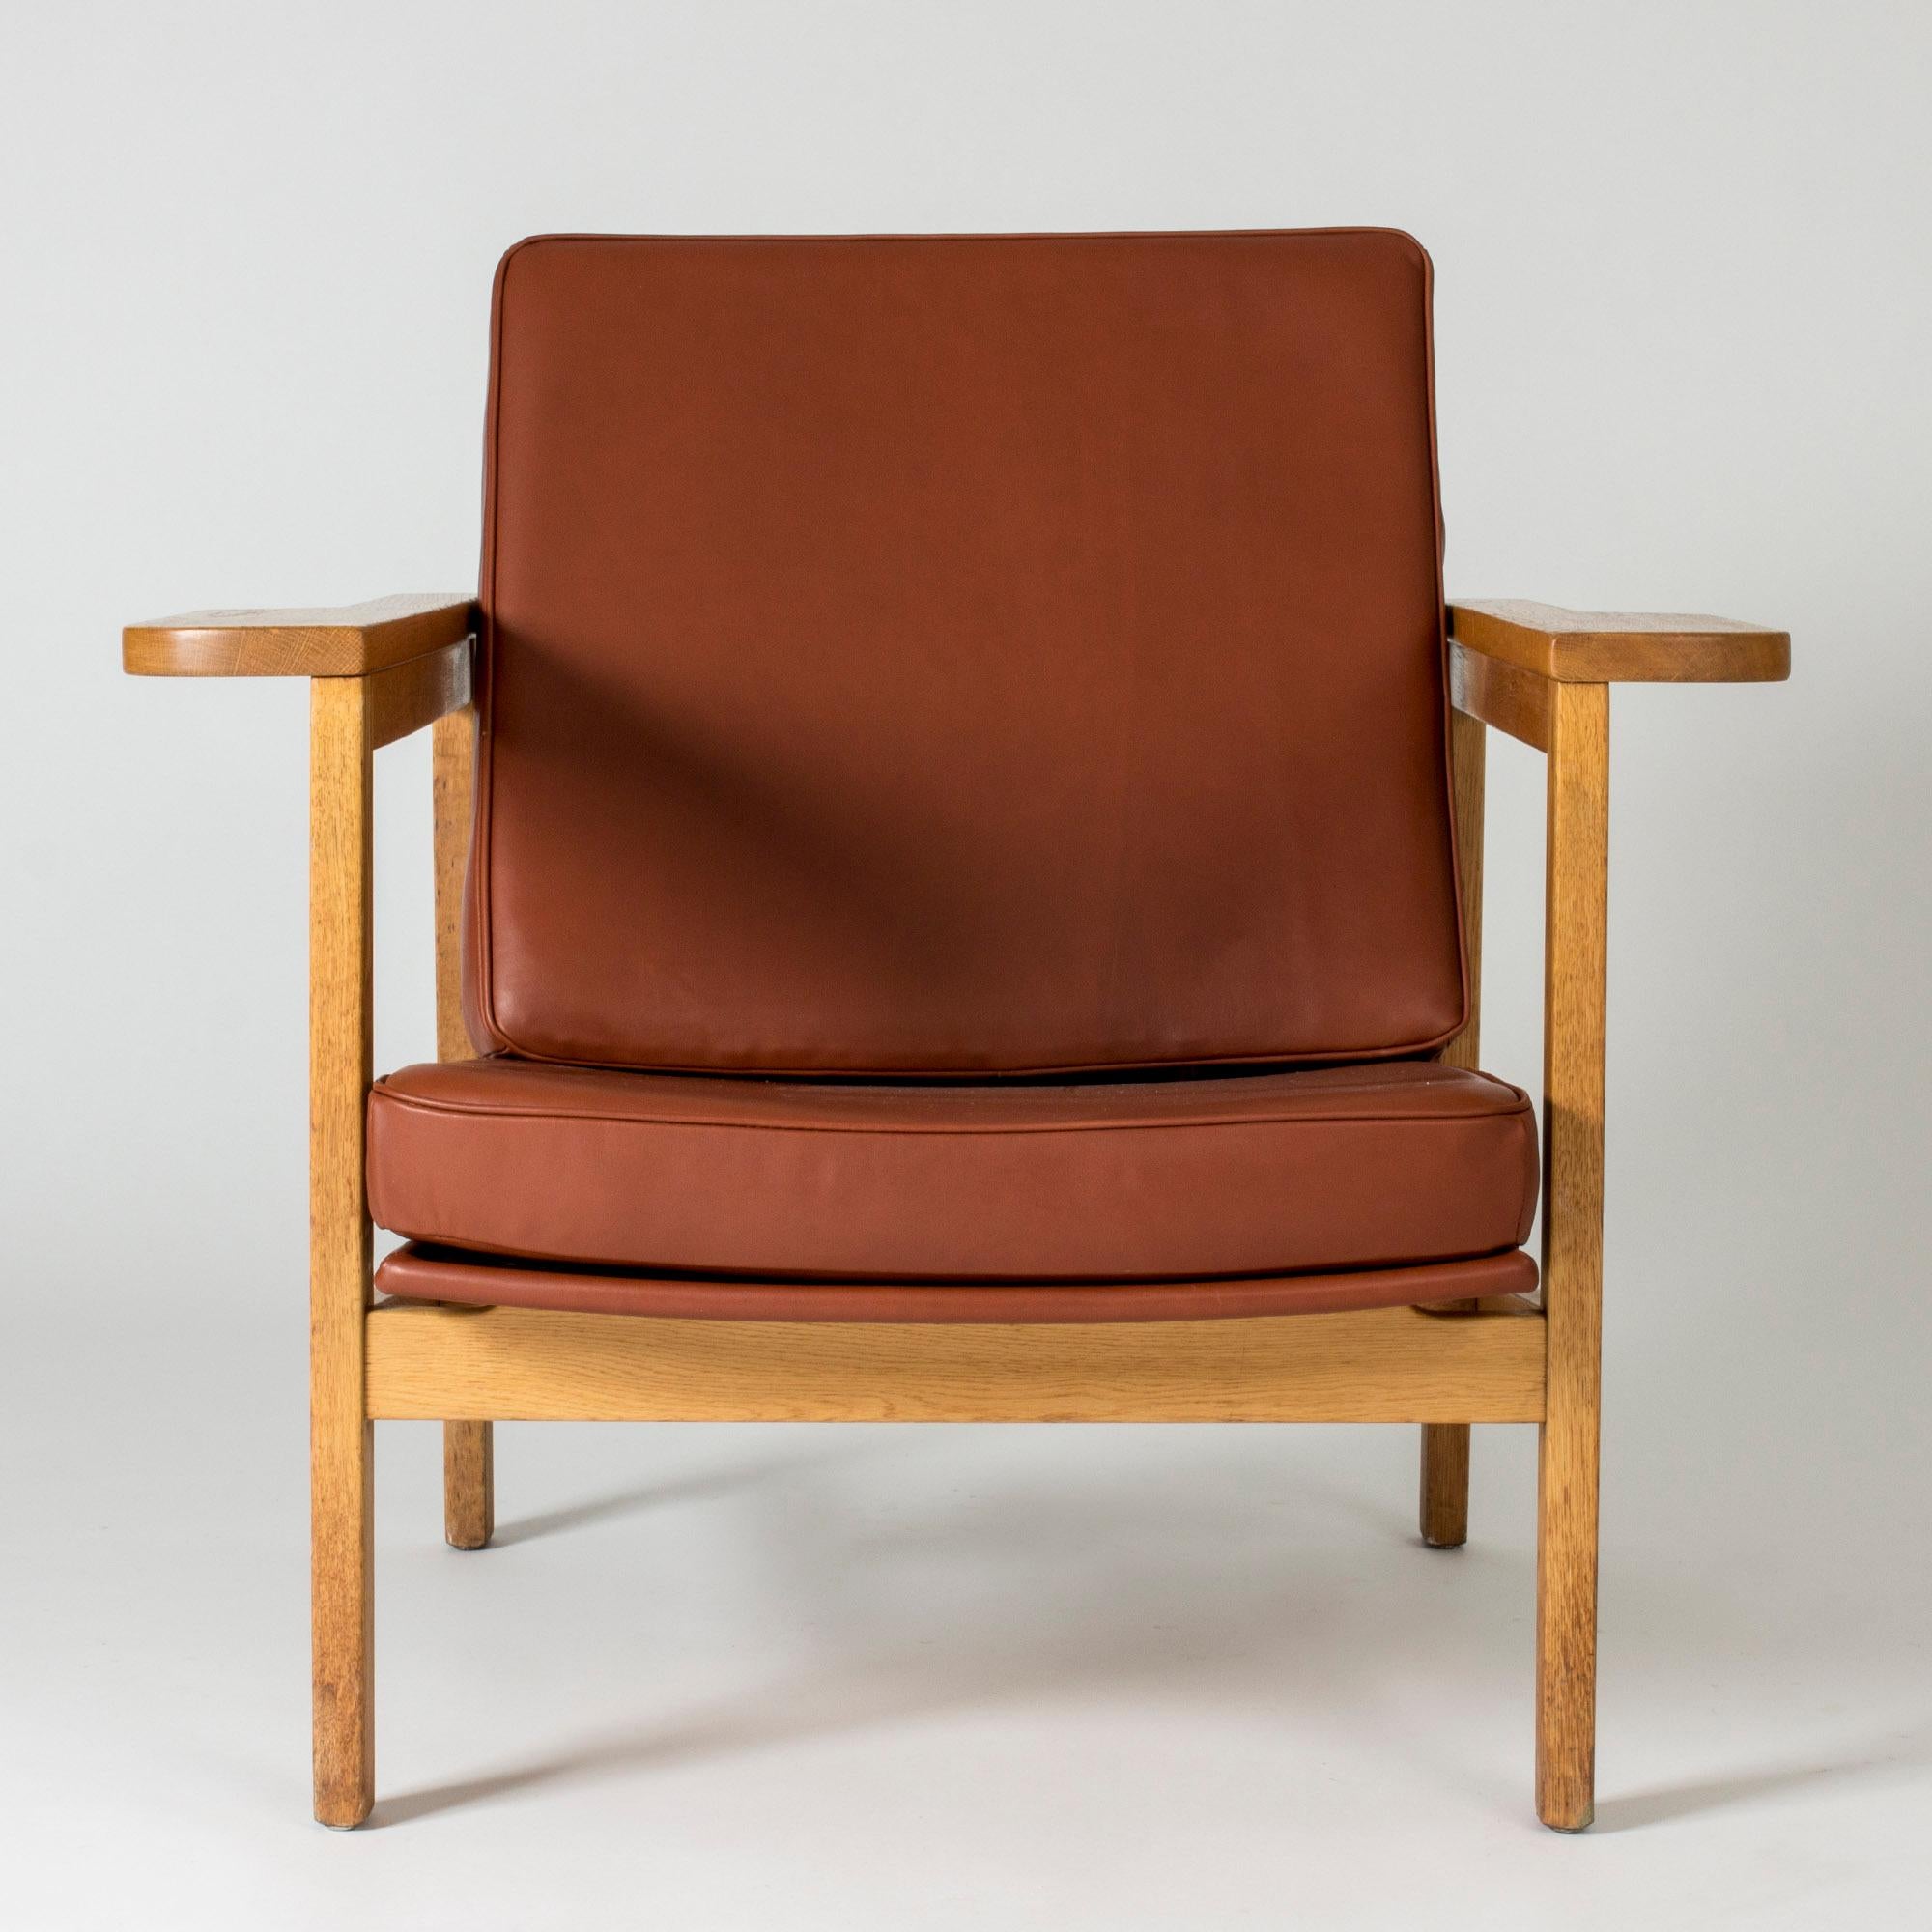 Swedish Pair of Lounge Chairs by Carl-Axel Acking for Nordiska Kompaniet, Sweden, 1950s For Sale